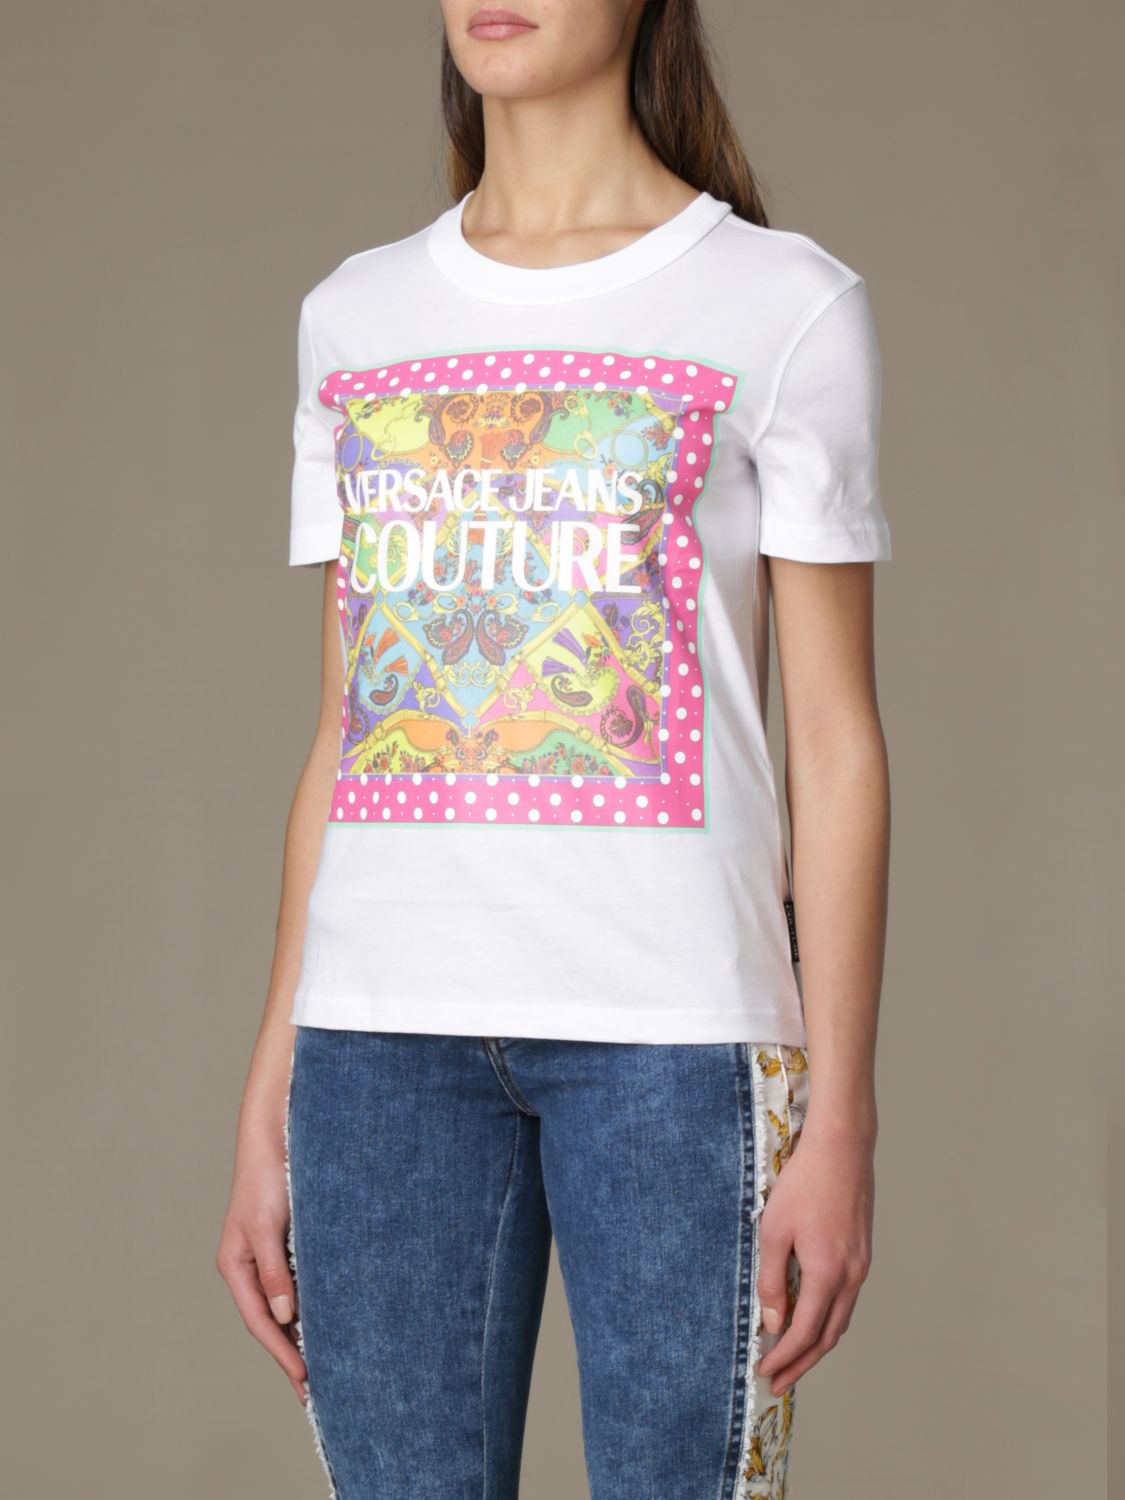 VERSACE JEANS COUTURE: T-shirt with Paisley print | T-Shirt Versace Jeans Couture Women White 